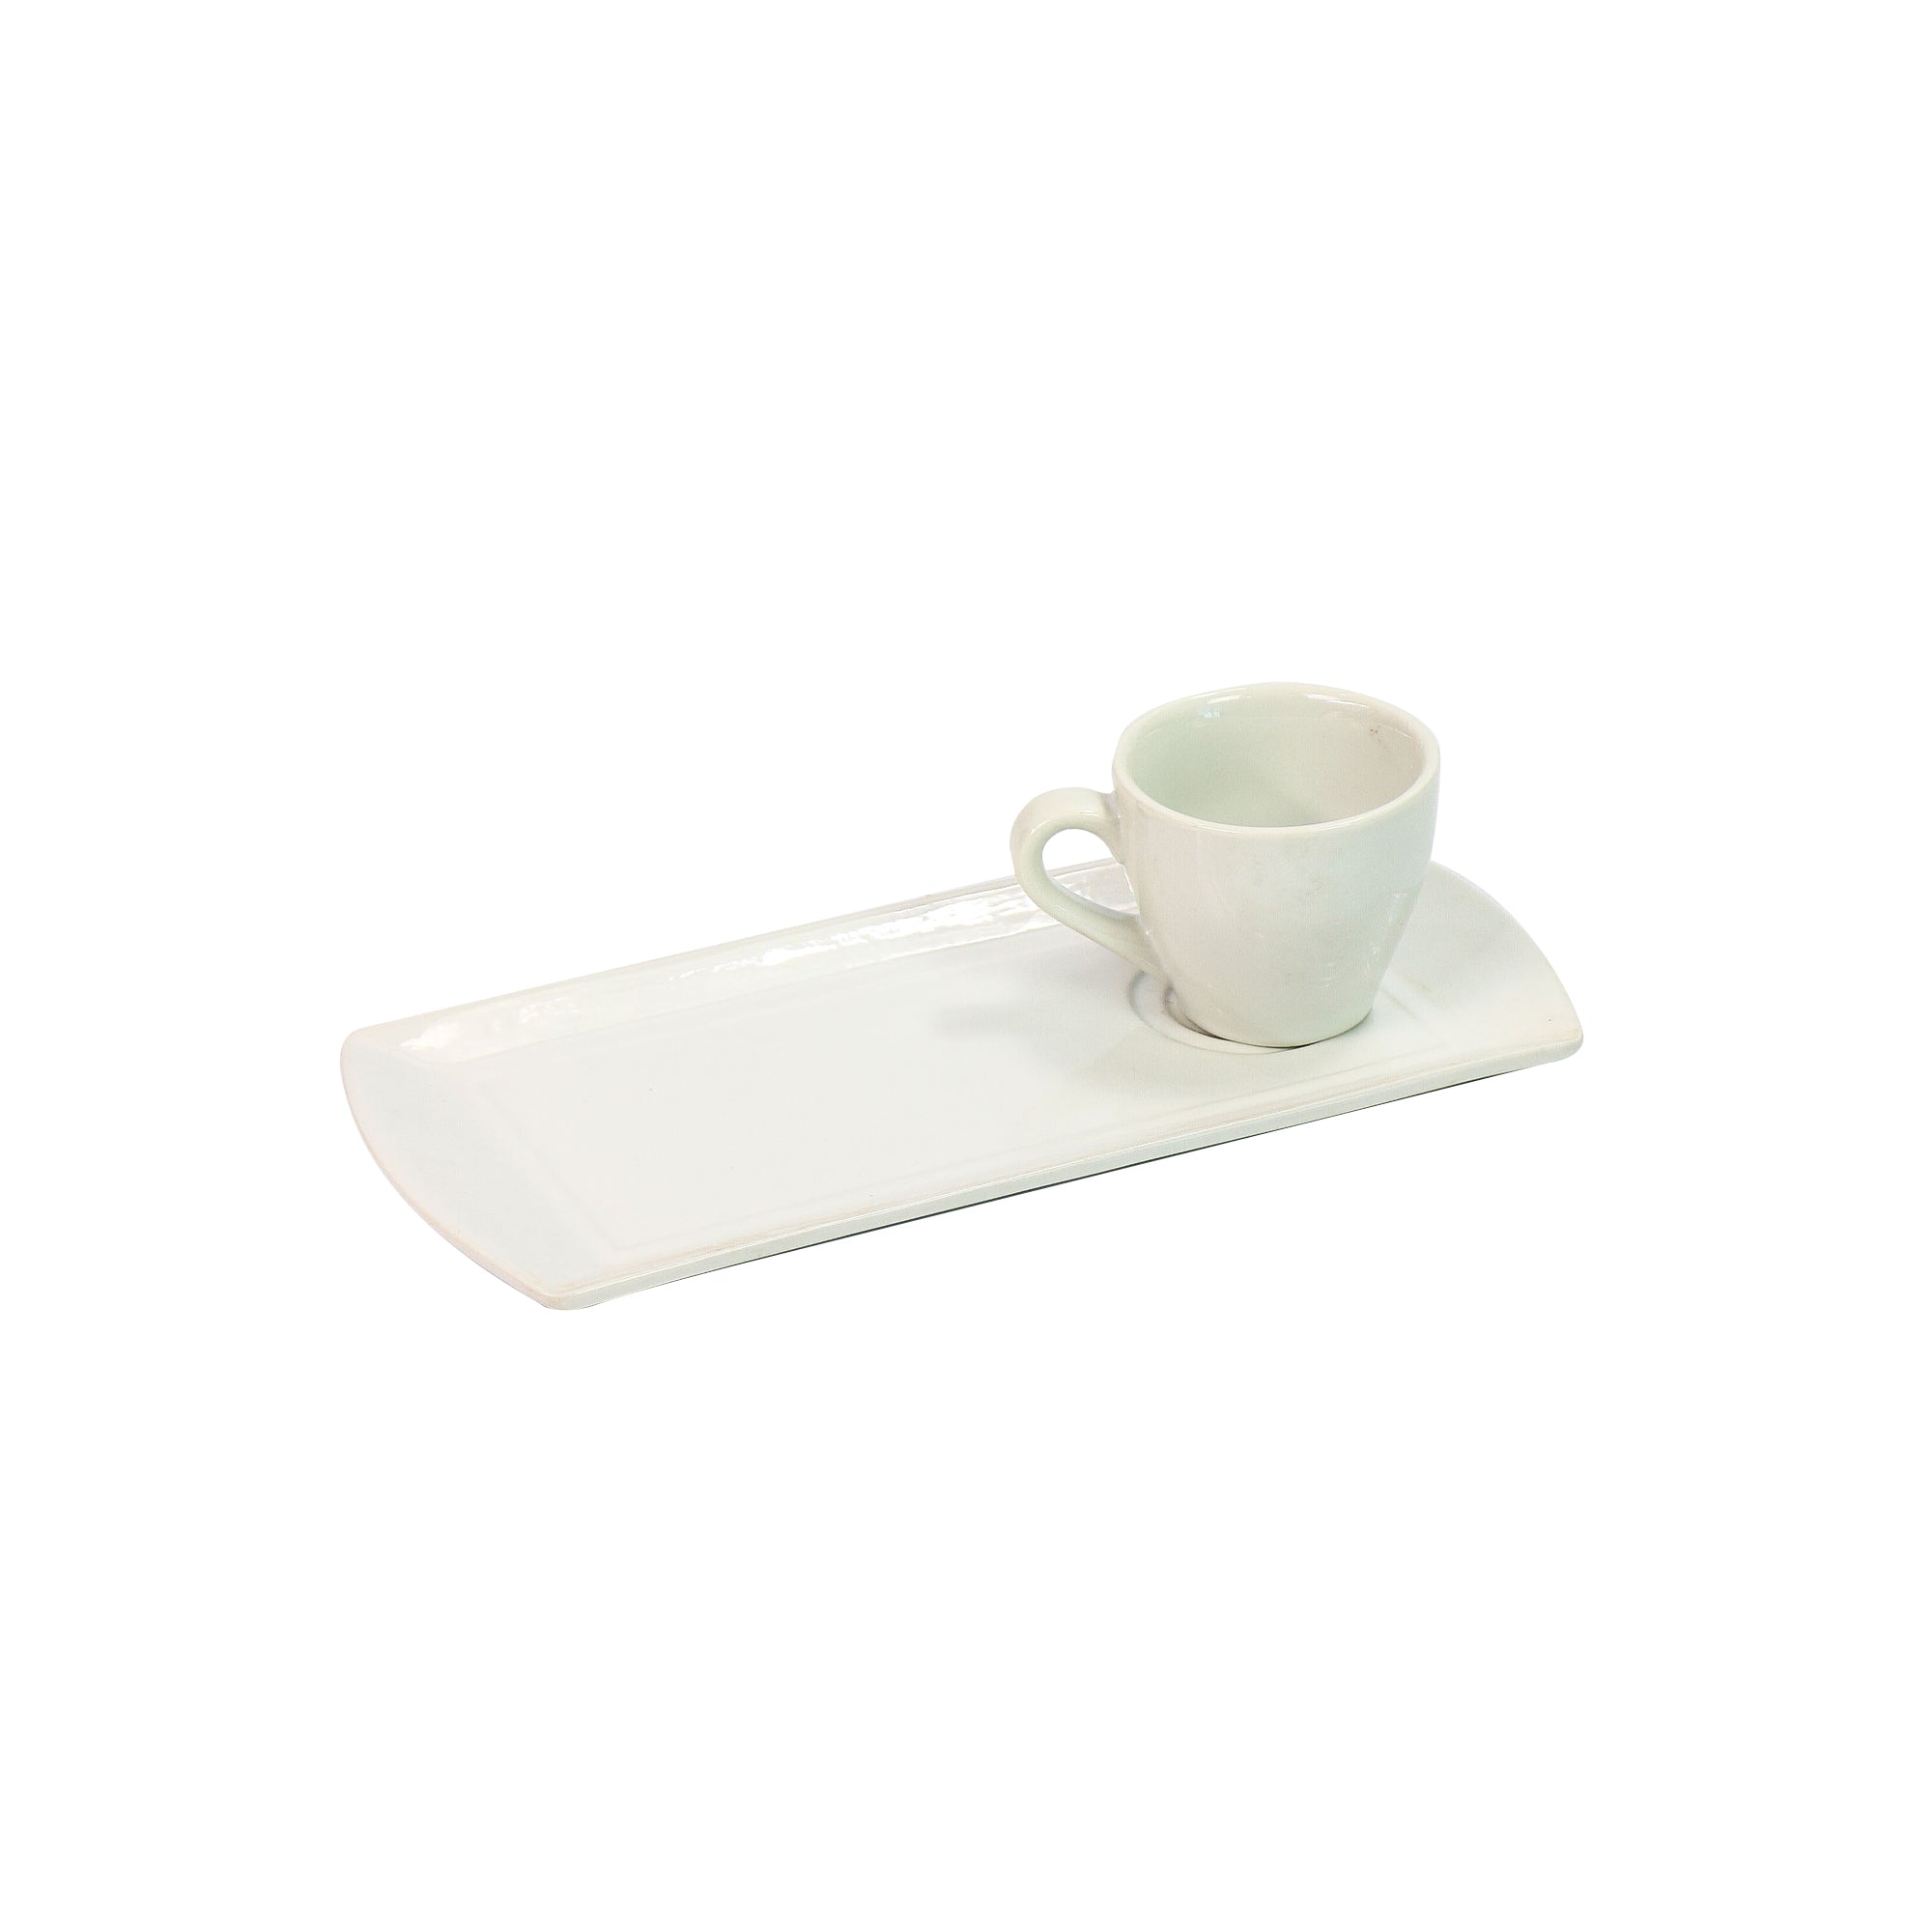 Ceramic Cafe Latte Coffee Mug 220ml with 11.75inch Saucer Serving Plate